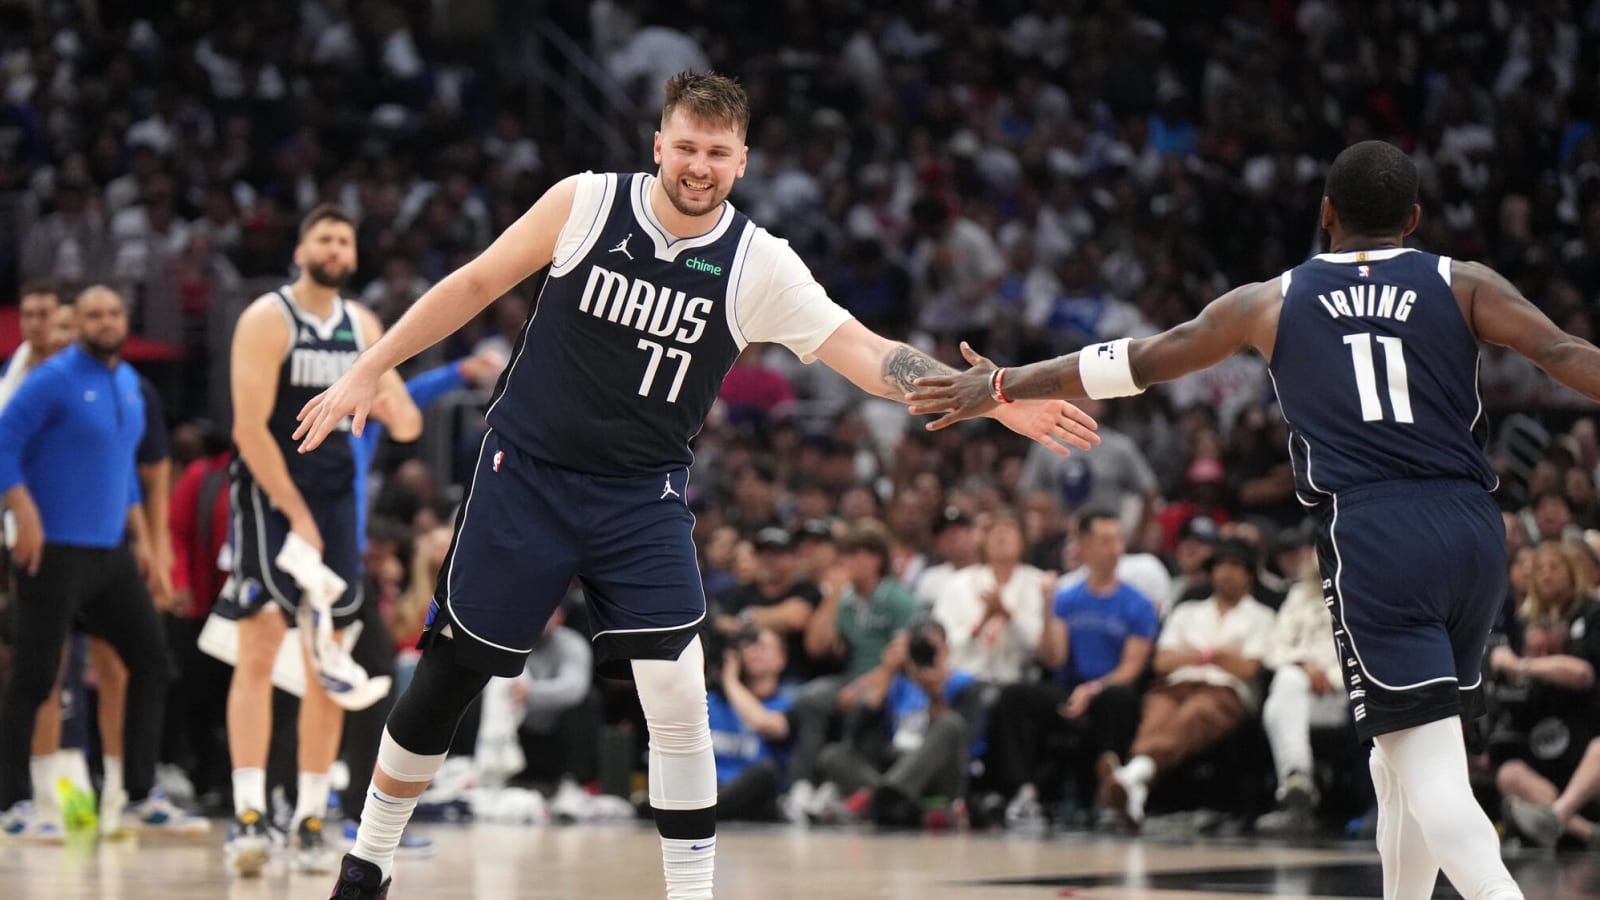 Dallas Mavericks Star Luka Doncic’s Honest Reaction to Massive Game 5 Win Vs. Clippers: ‘We Didn’t Do Nothing Yet’